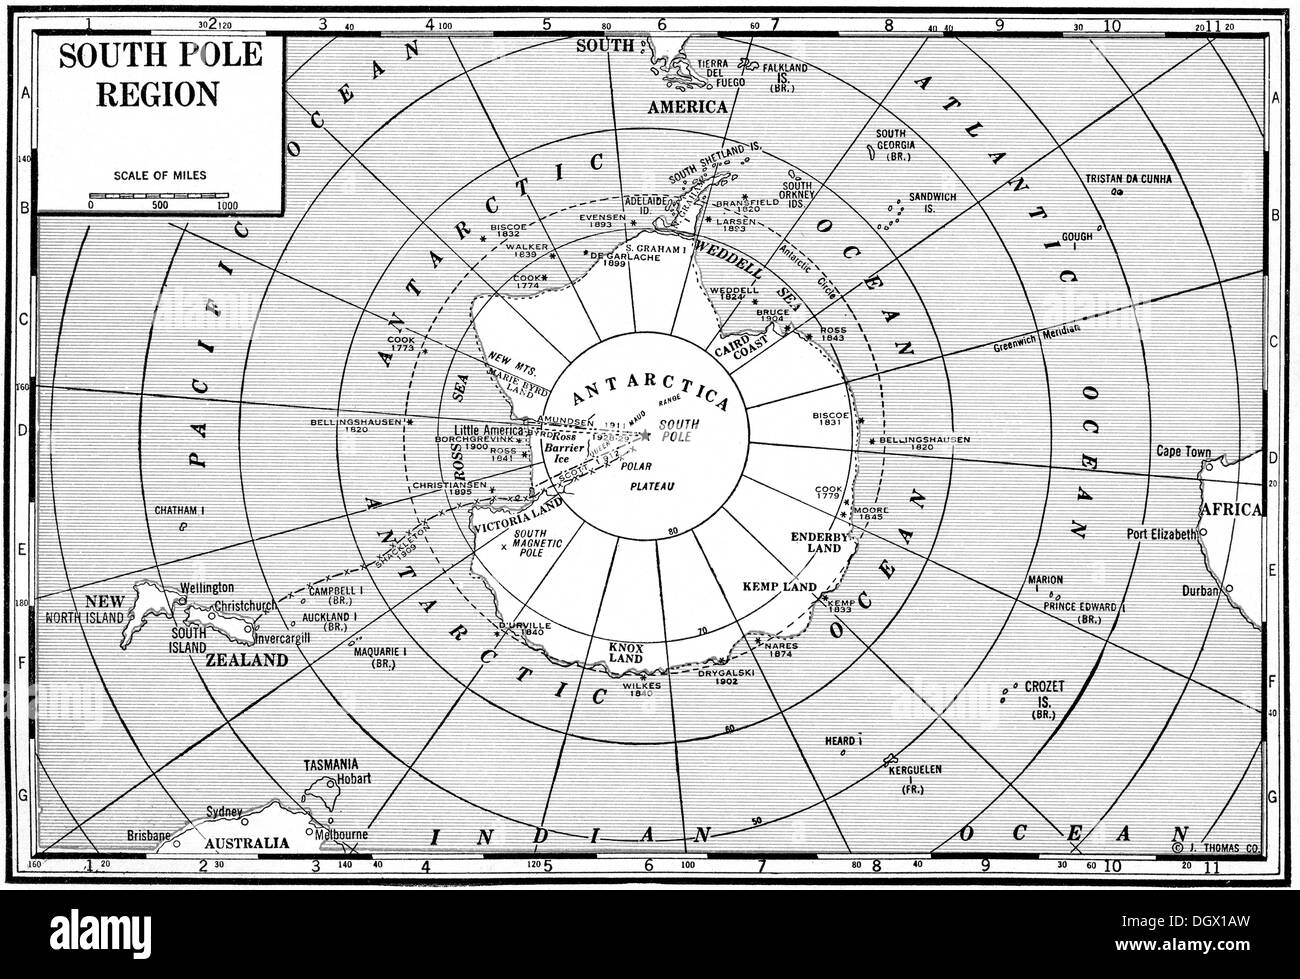 Old map of South Pole, Antarctica, 1930's Stock Photo